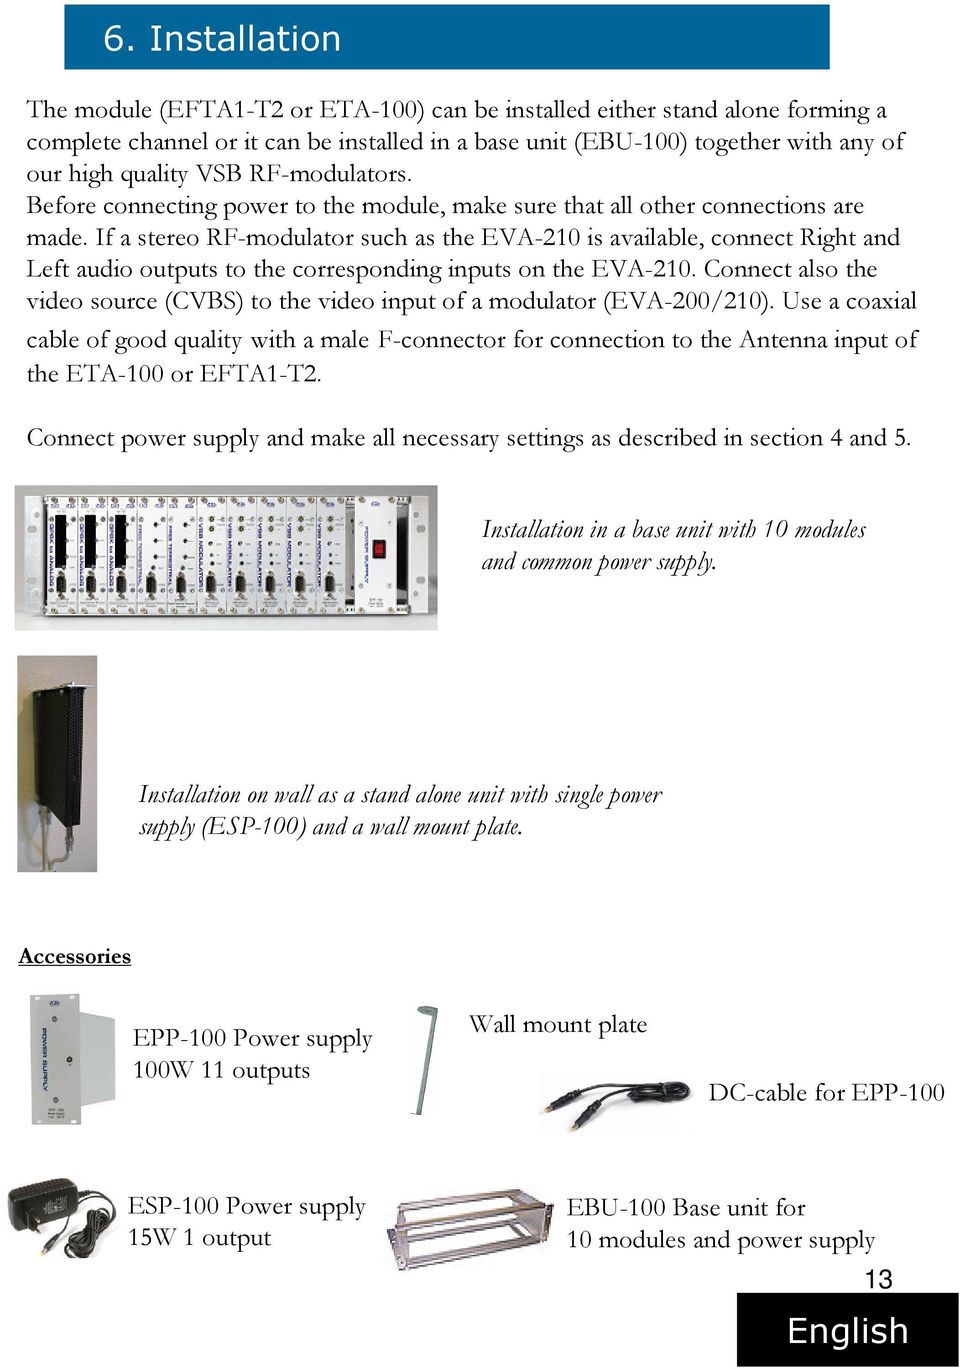 If a stereo RF-modulator such as the EVA-210 is available, connect Right and Left audio outputs to the corresponding inputs on the EVA-210.